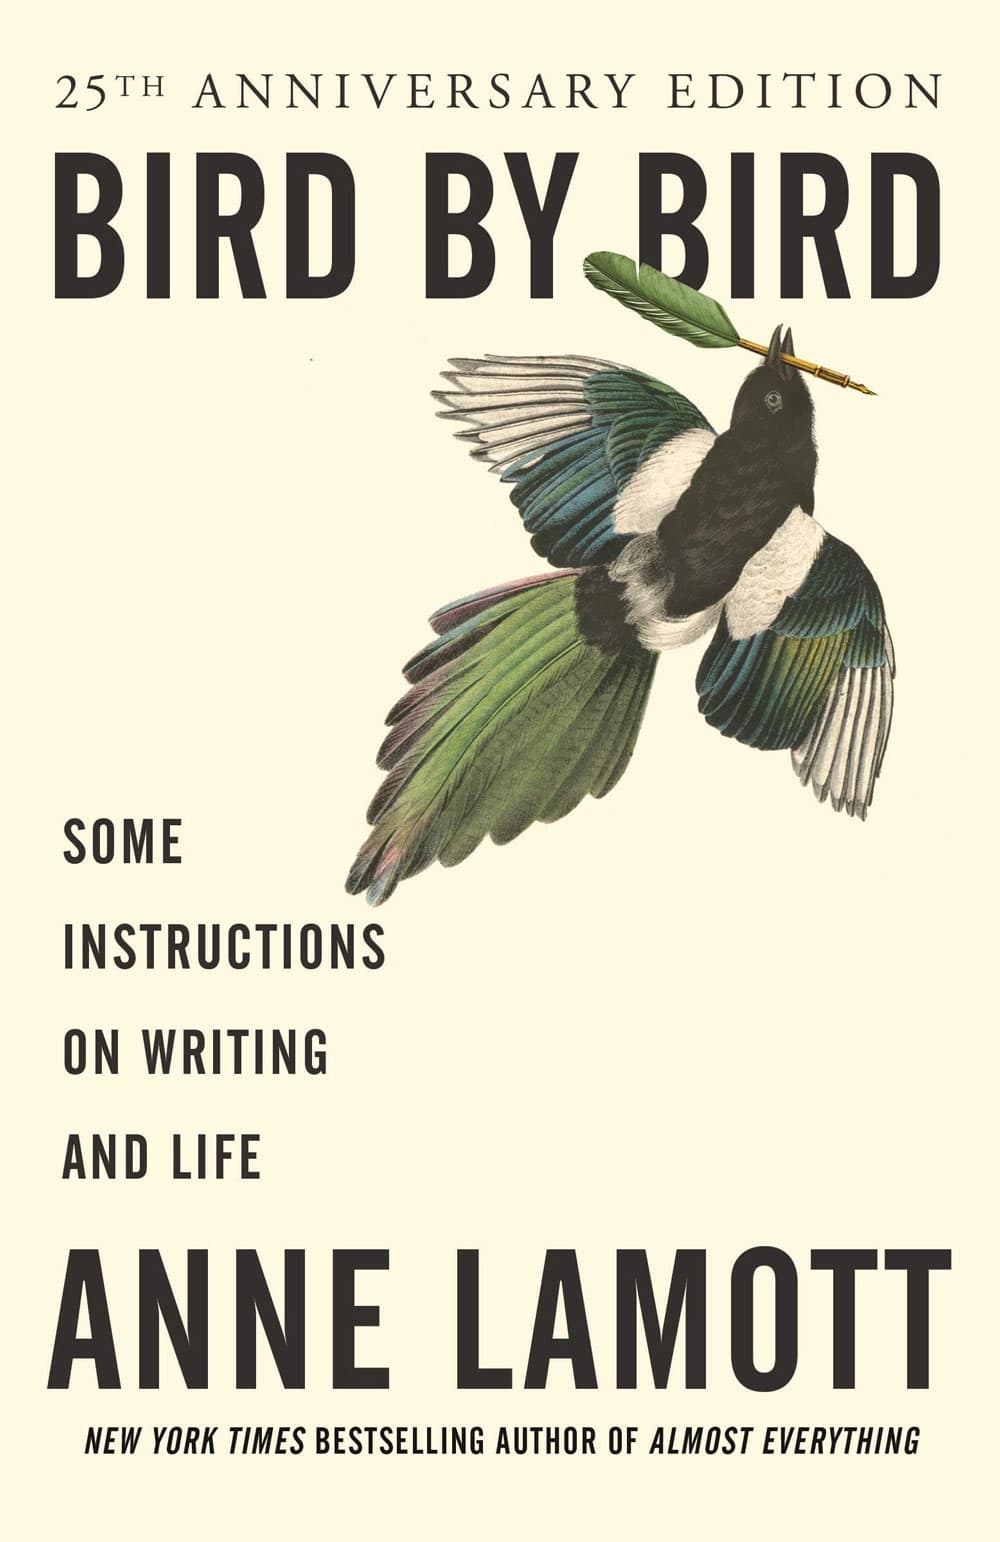 The cover of Bird by Bird